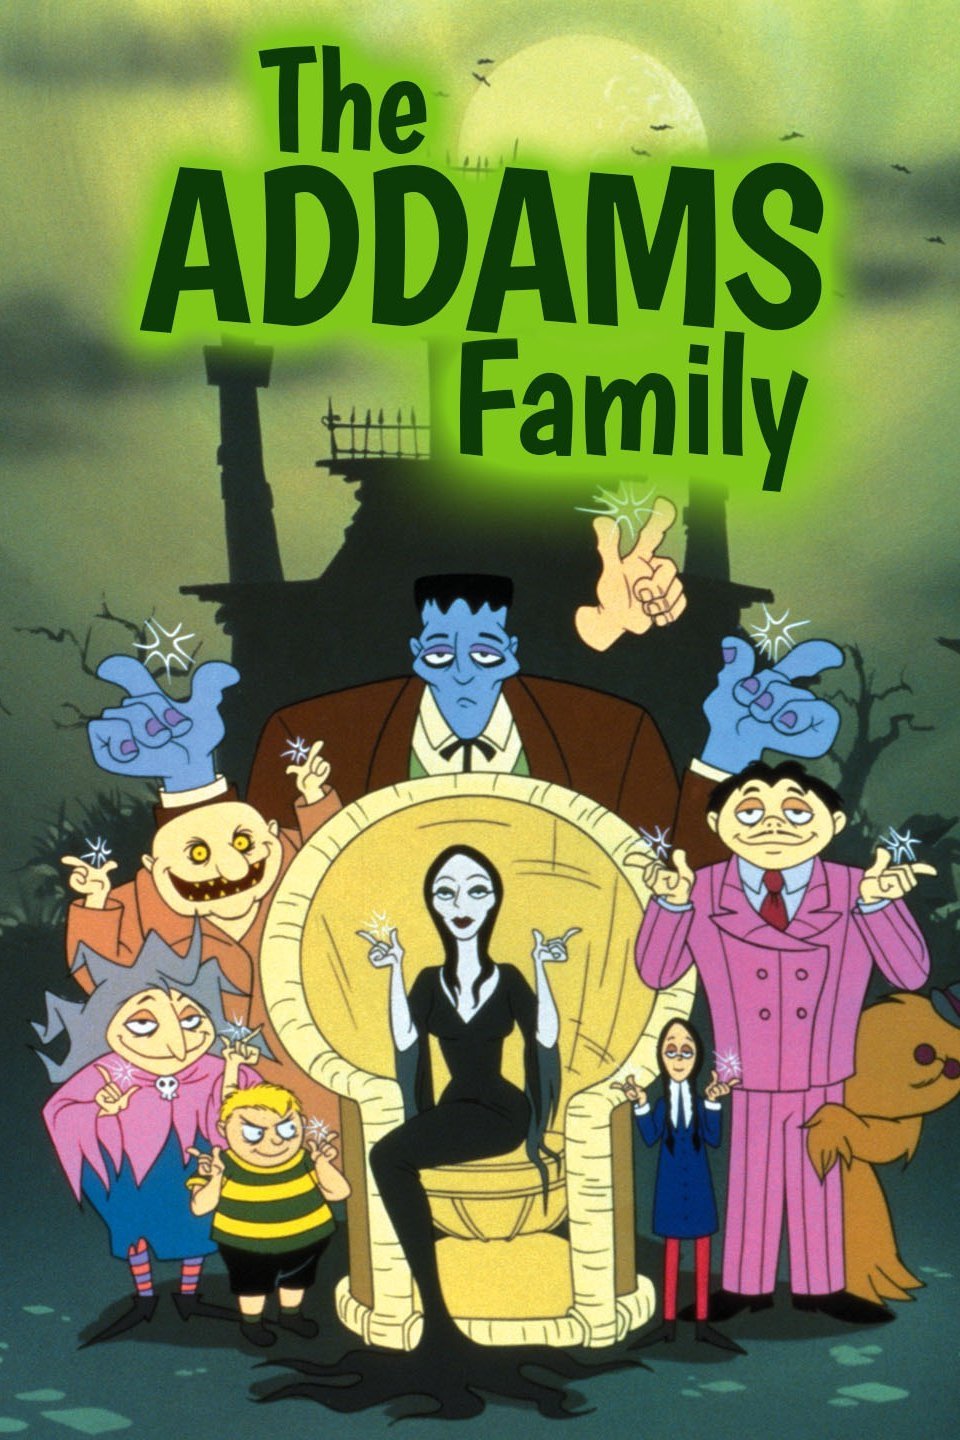 The Addams Family - Rotten Tomatoes